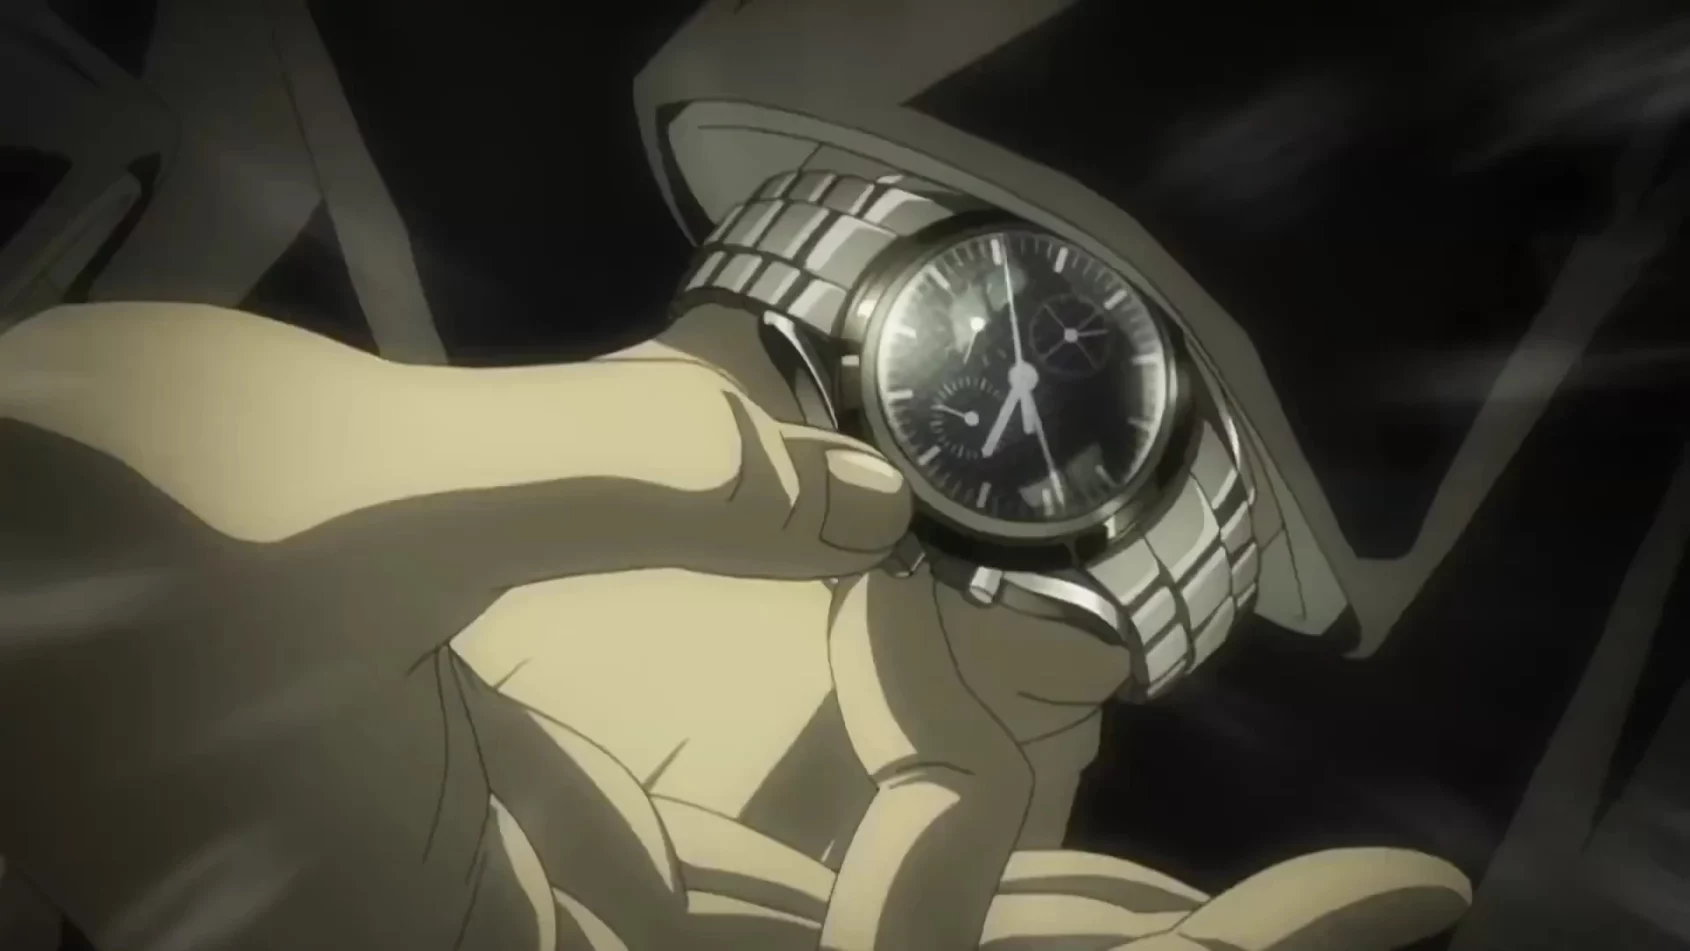 The best moments of watches in anime